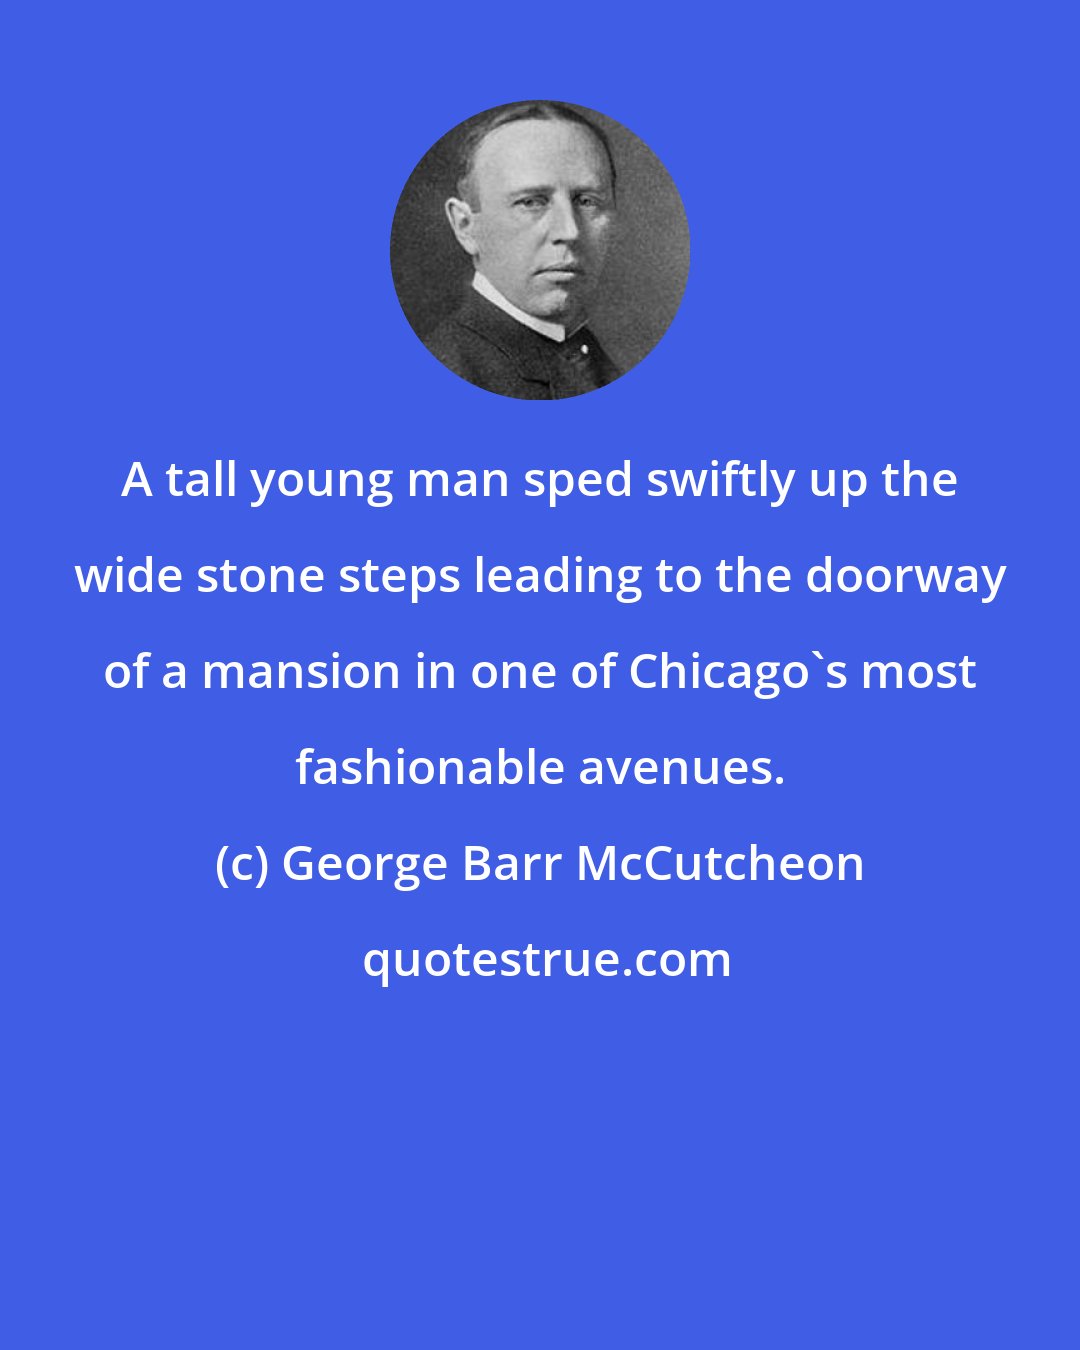 George Barr McCutcheon: A tall young man sped swiftly up the wide stone steps leading to the doorway of a mansion in one of Chicago's most fashionable avenues.